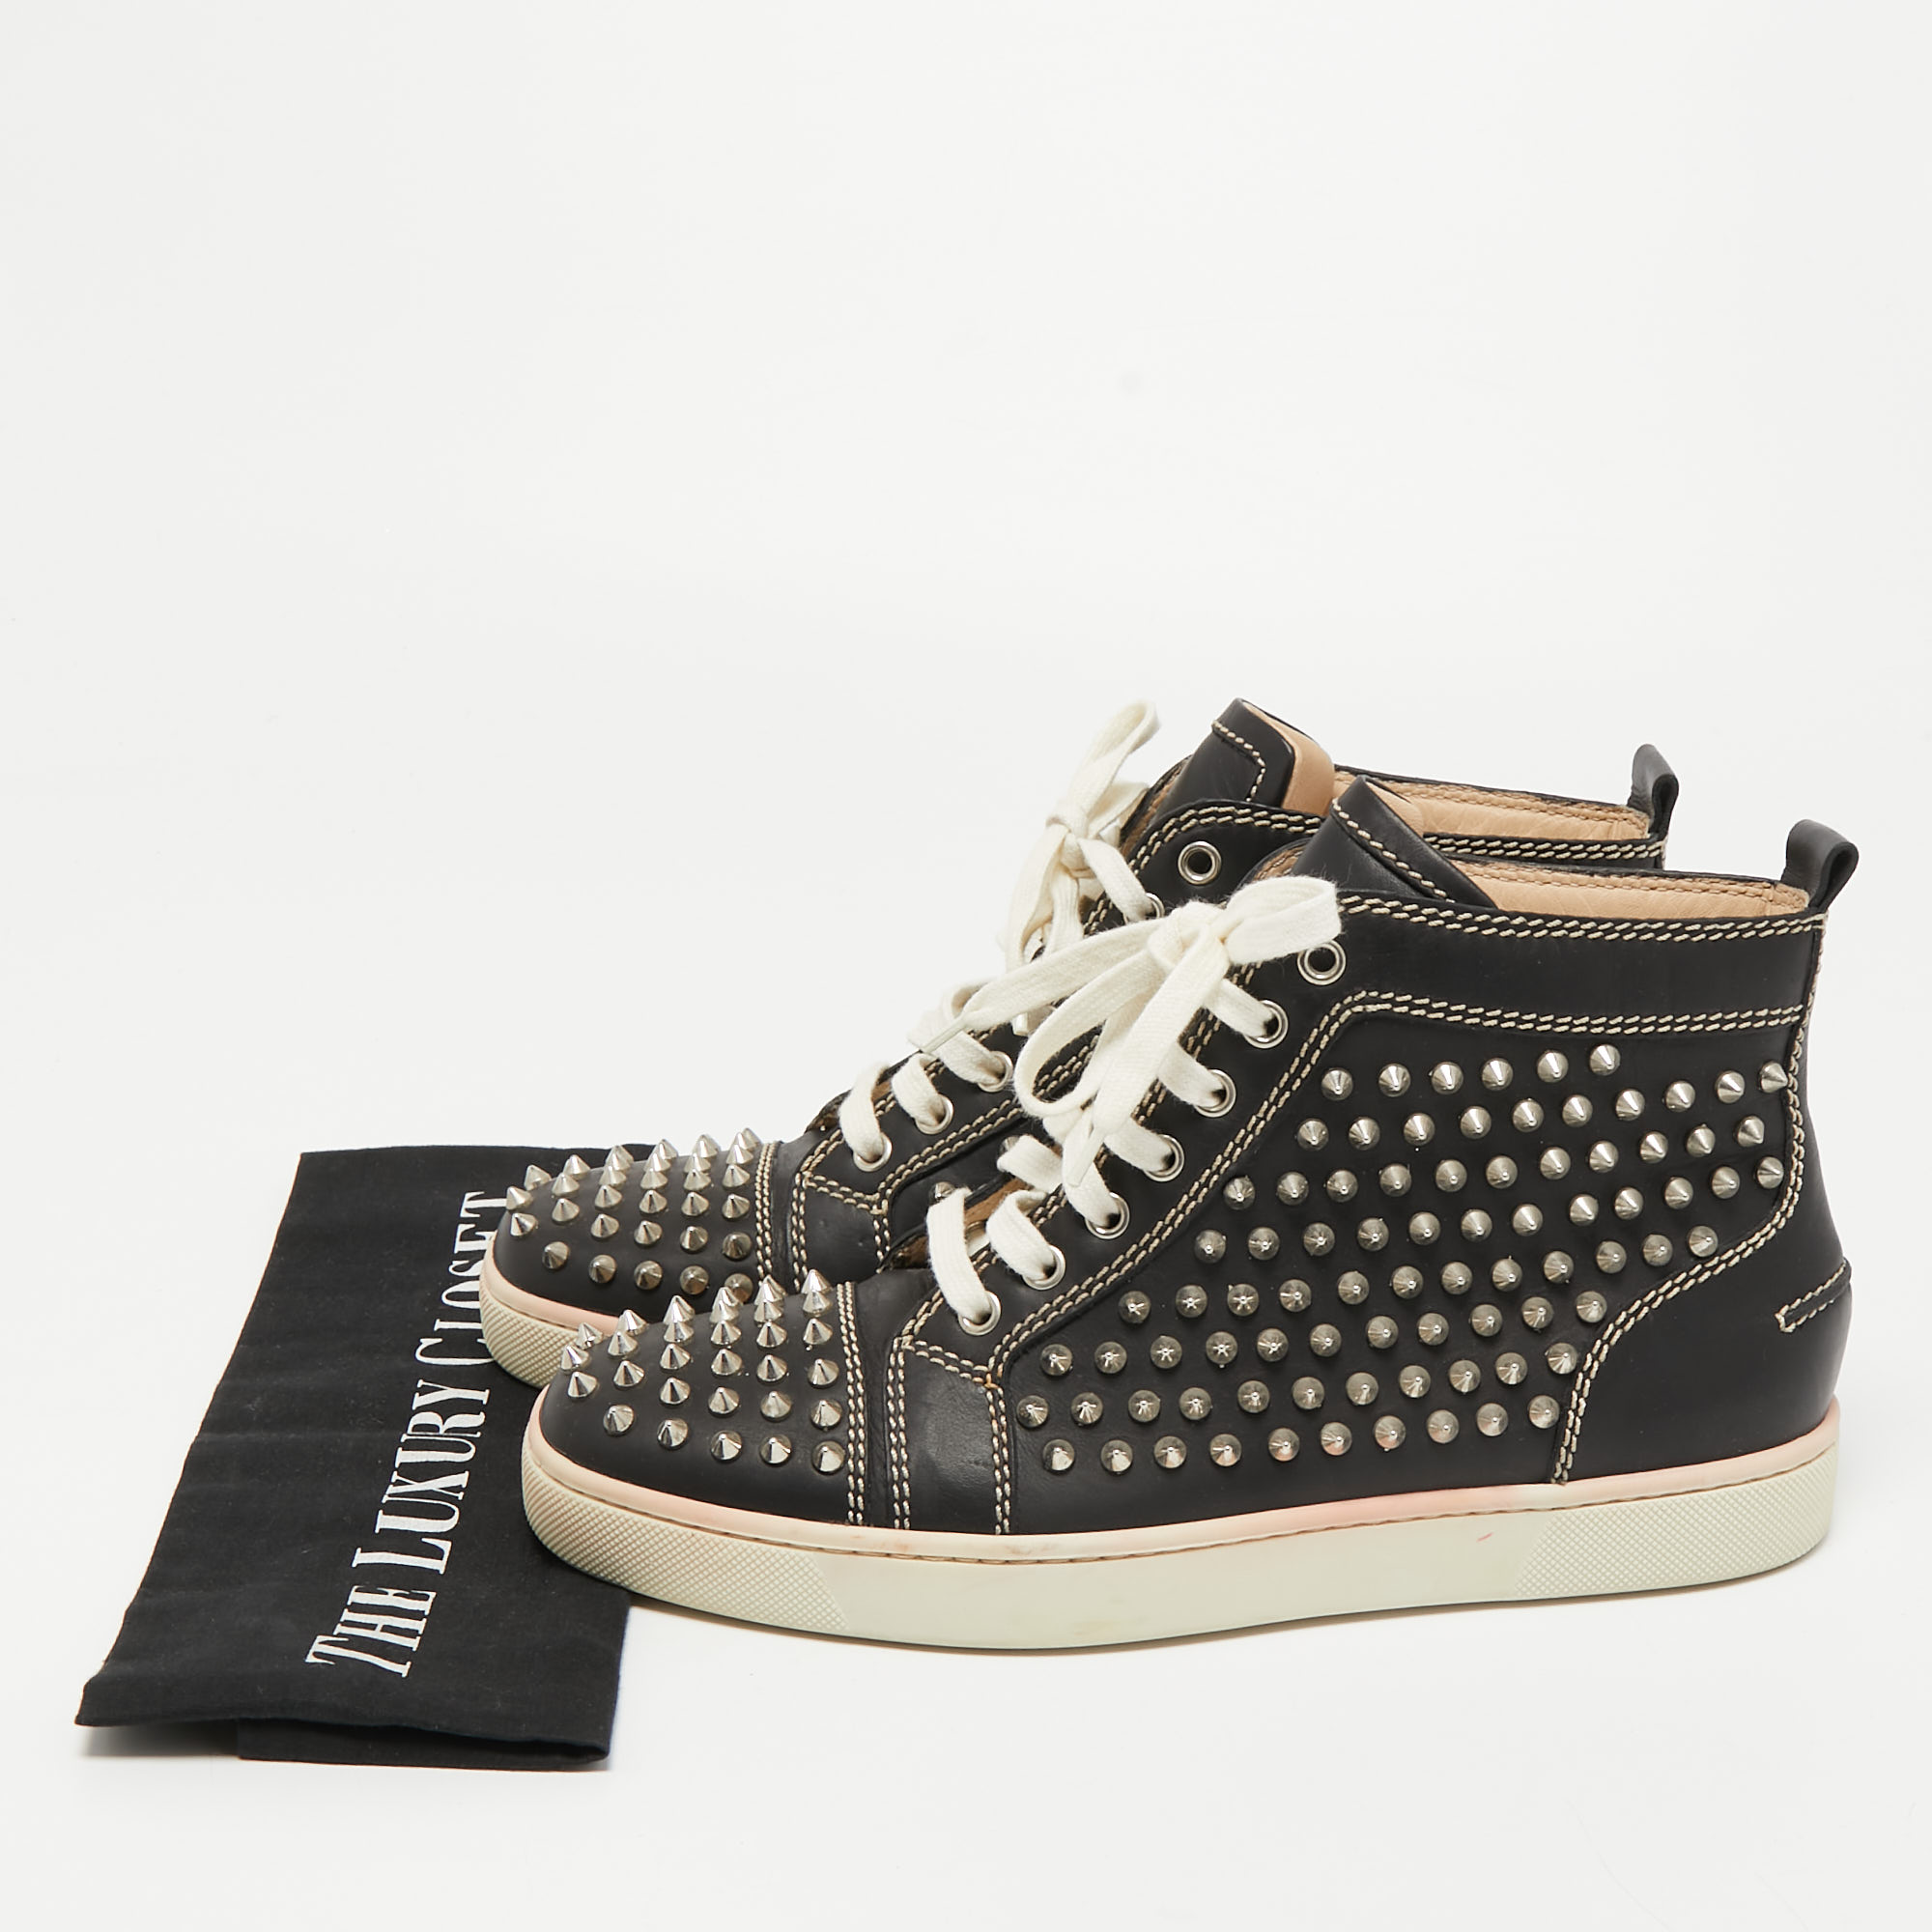 Christian Louboutin Black Leather Louis Spikes High Top Sneakers Size 40